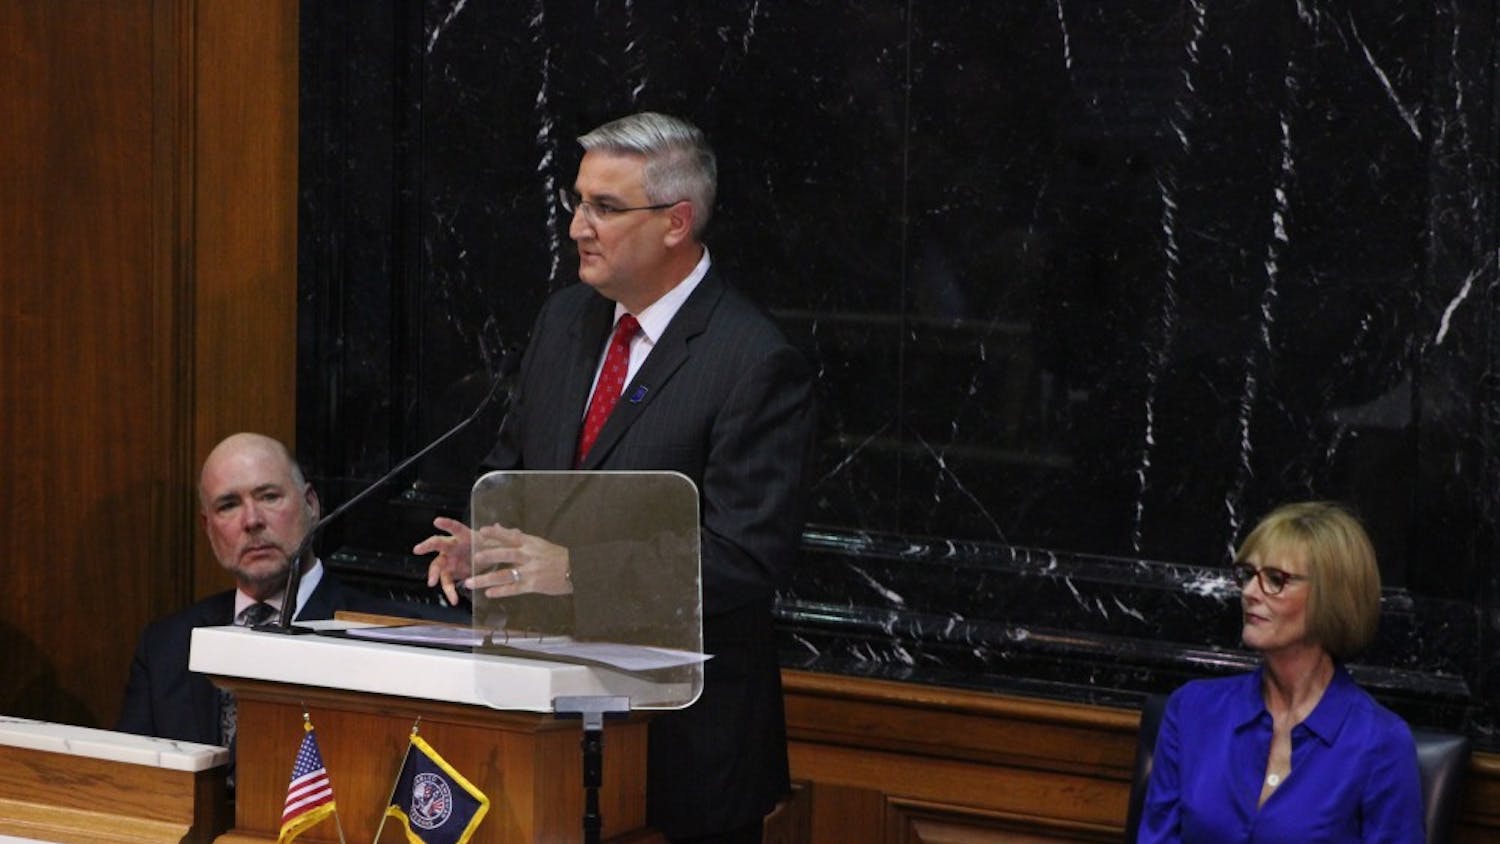 Gov. Eric Holcomb gives his State of the State speech Tuesday at the Indiana statehouse. Holcomb addressed topics such as drug abuse, education and infant mortality rates, and how Indiana citizens can help these issues improve in Indiana.&nbsp;